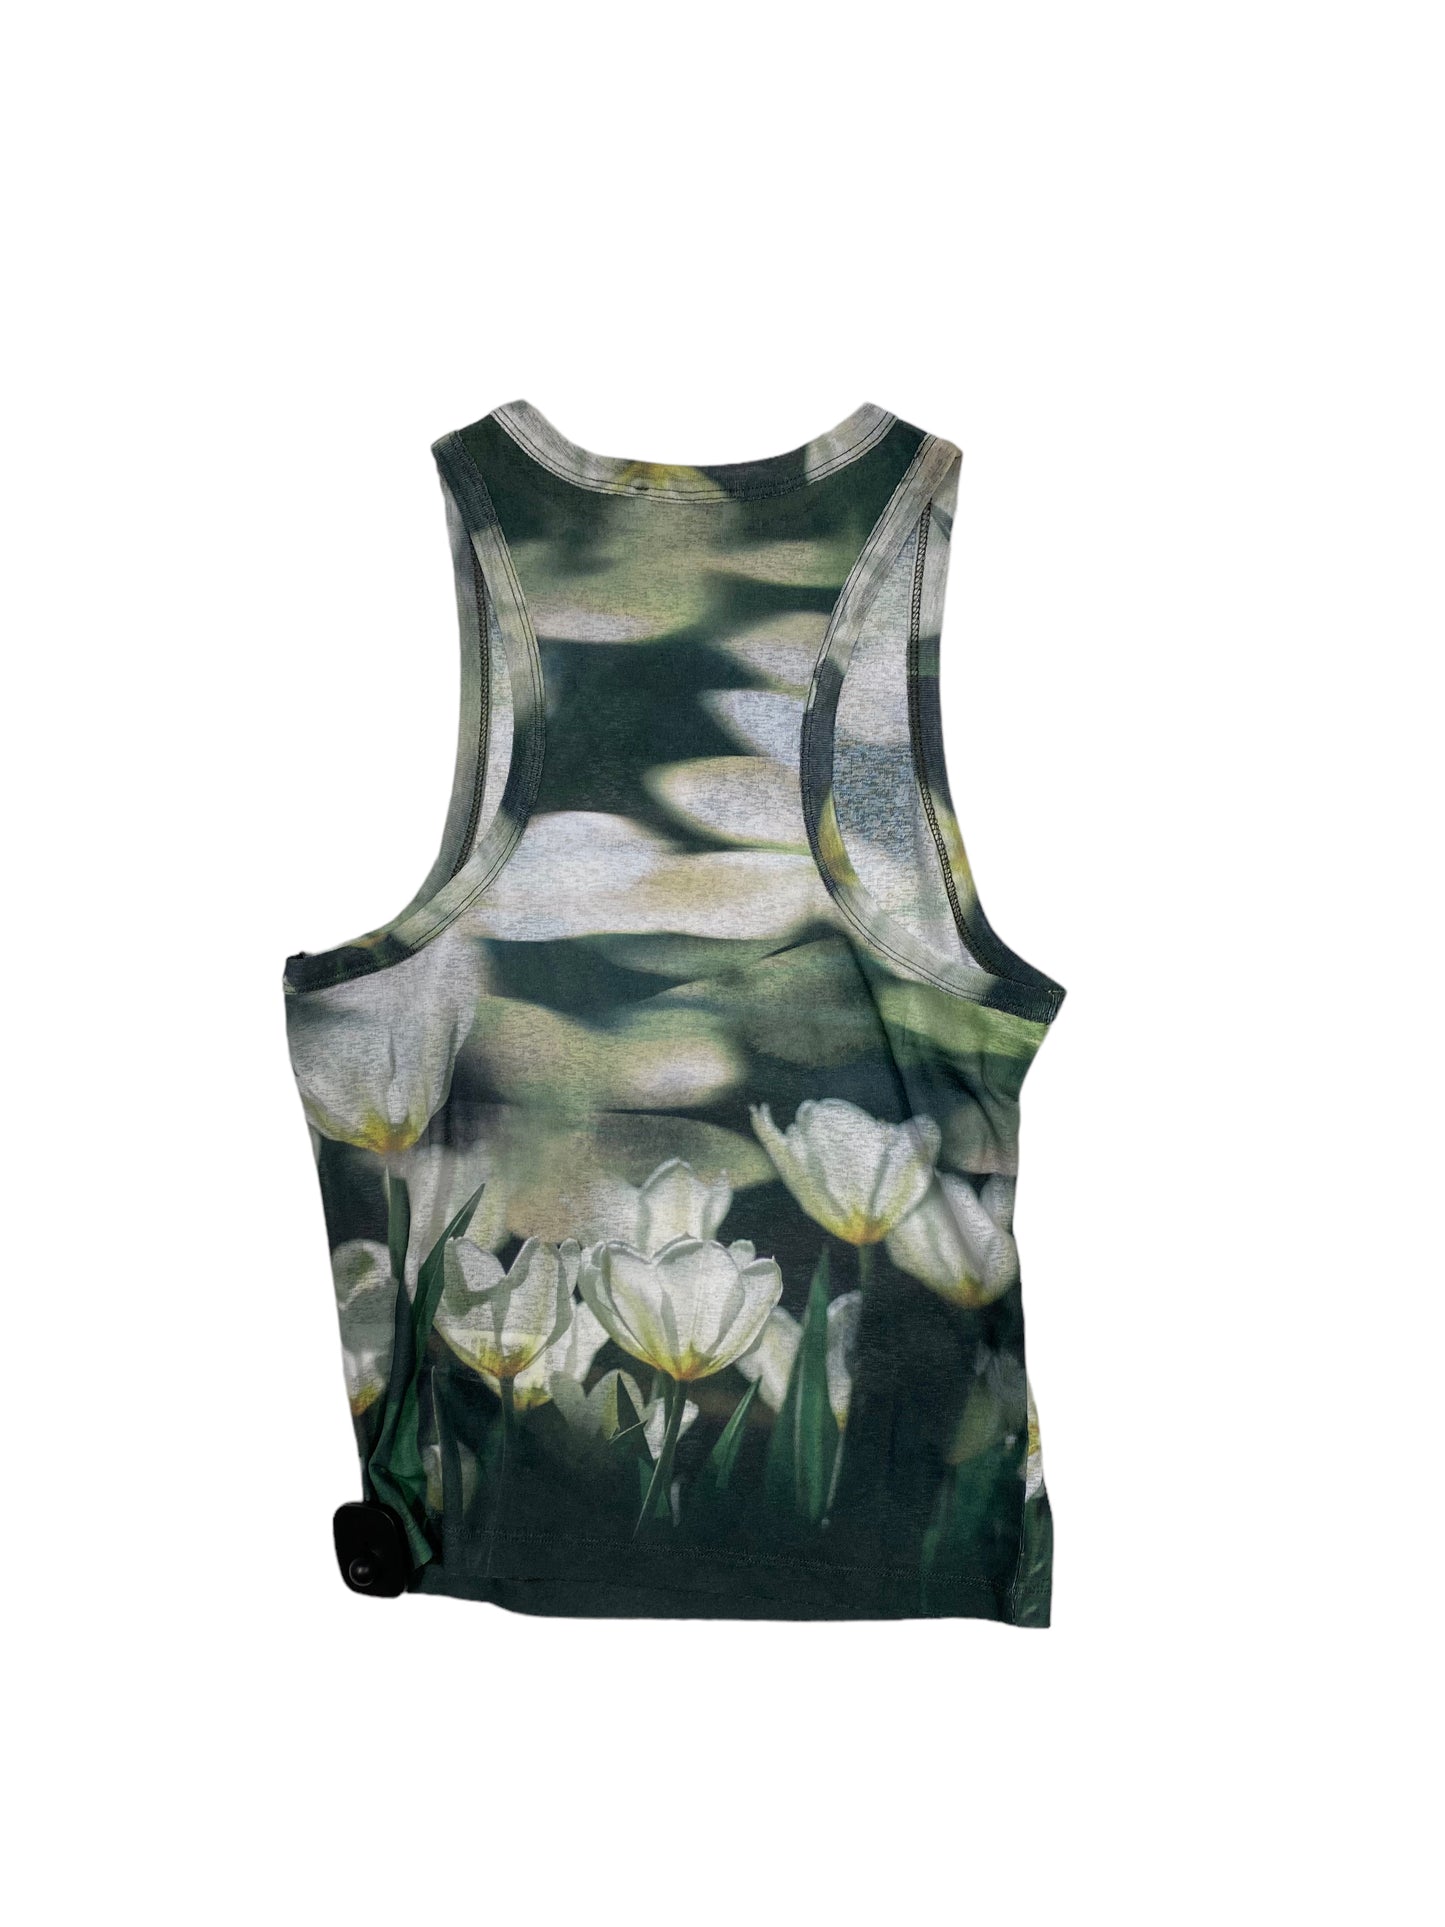 Multi-colored Top Sleeveless Topshop, Size M